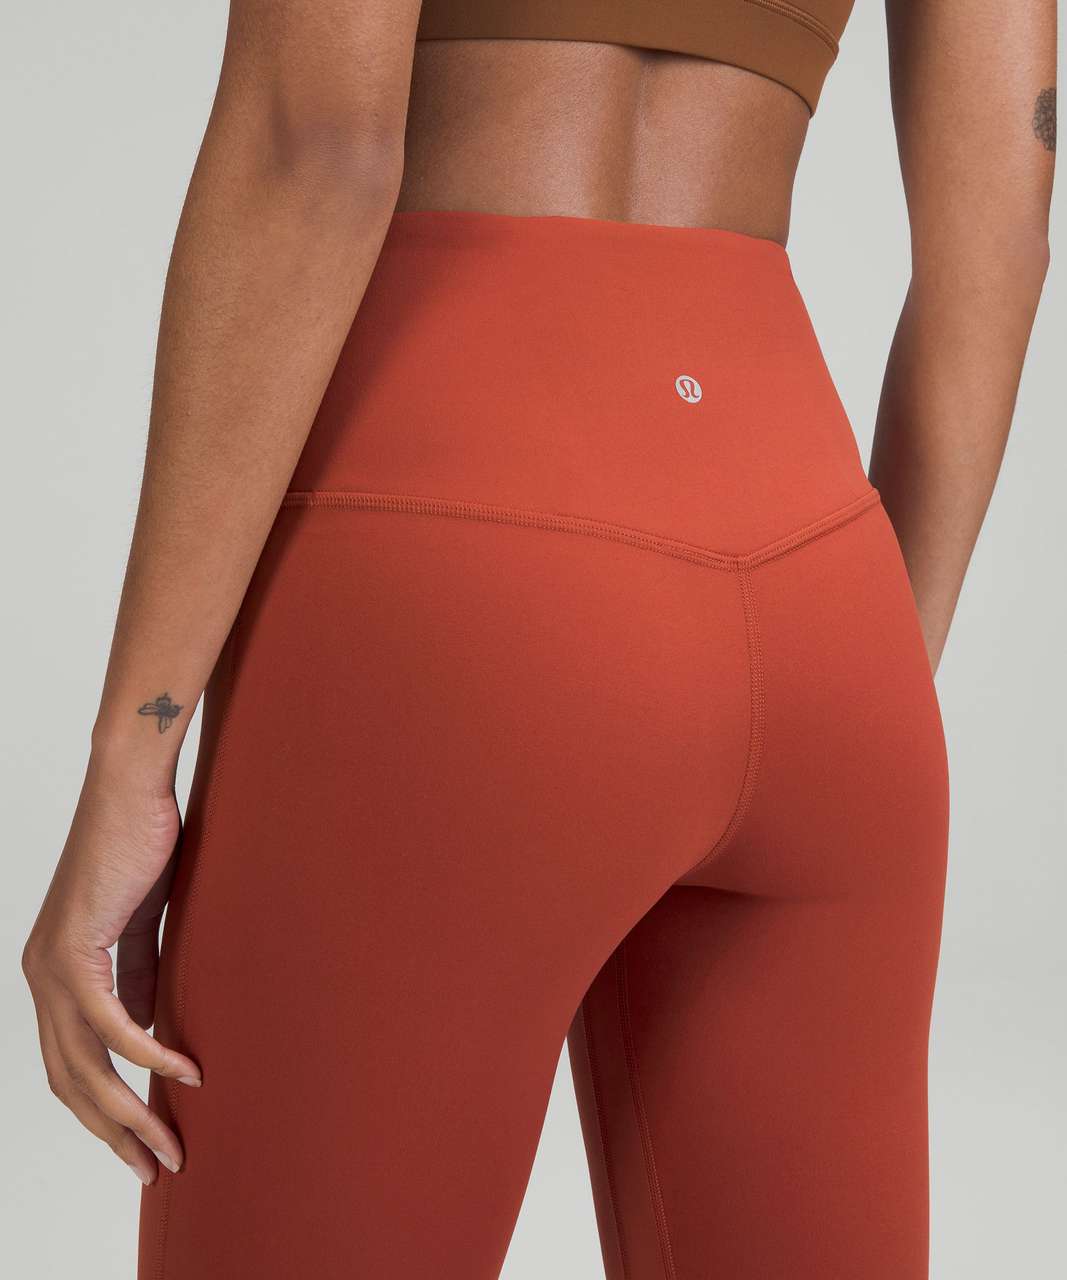 Lululemon Align High-Rise Mini Flared Pant 28/32 - Assorted Colors and Sizes  NWT